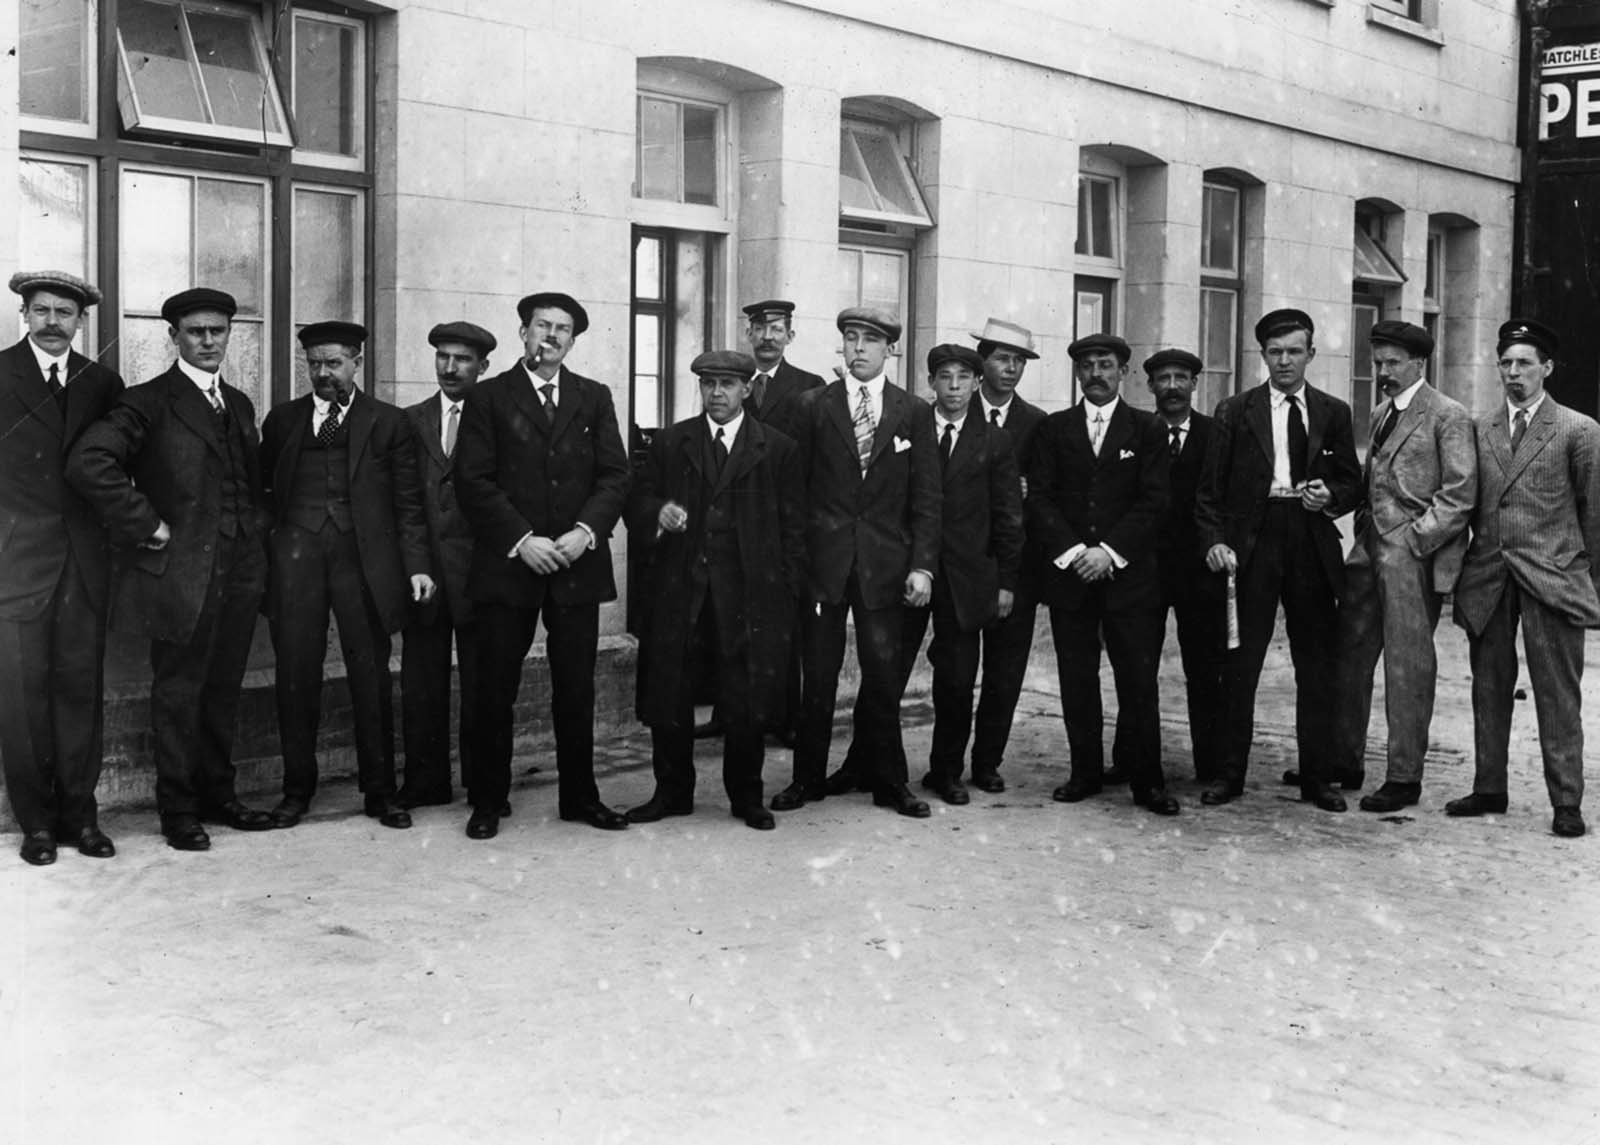 Surviving stewards line up outside a first-class waiting room before being called in for questioning by a board of inquiry.